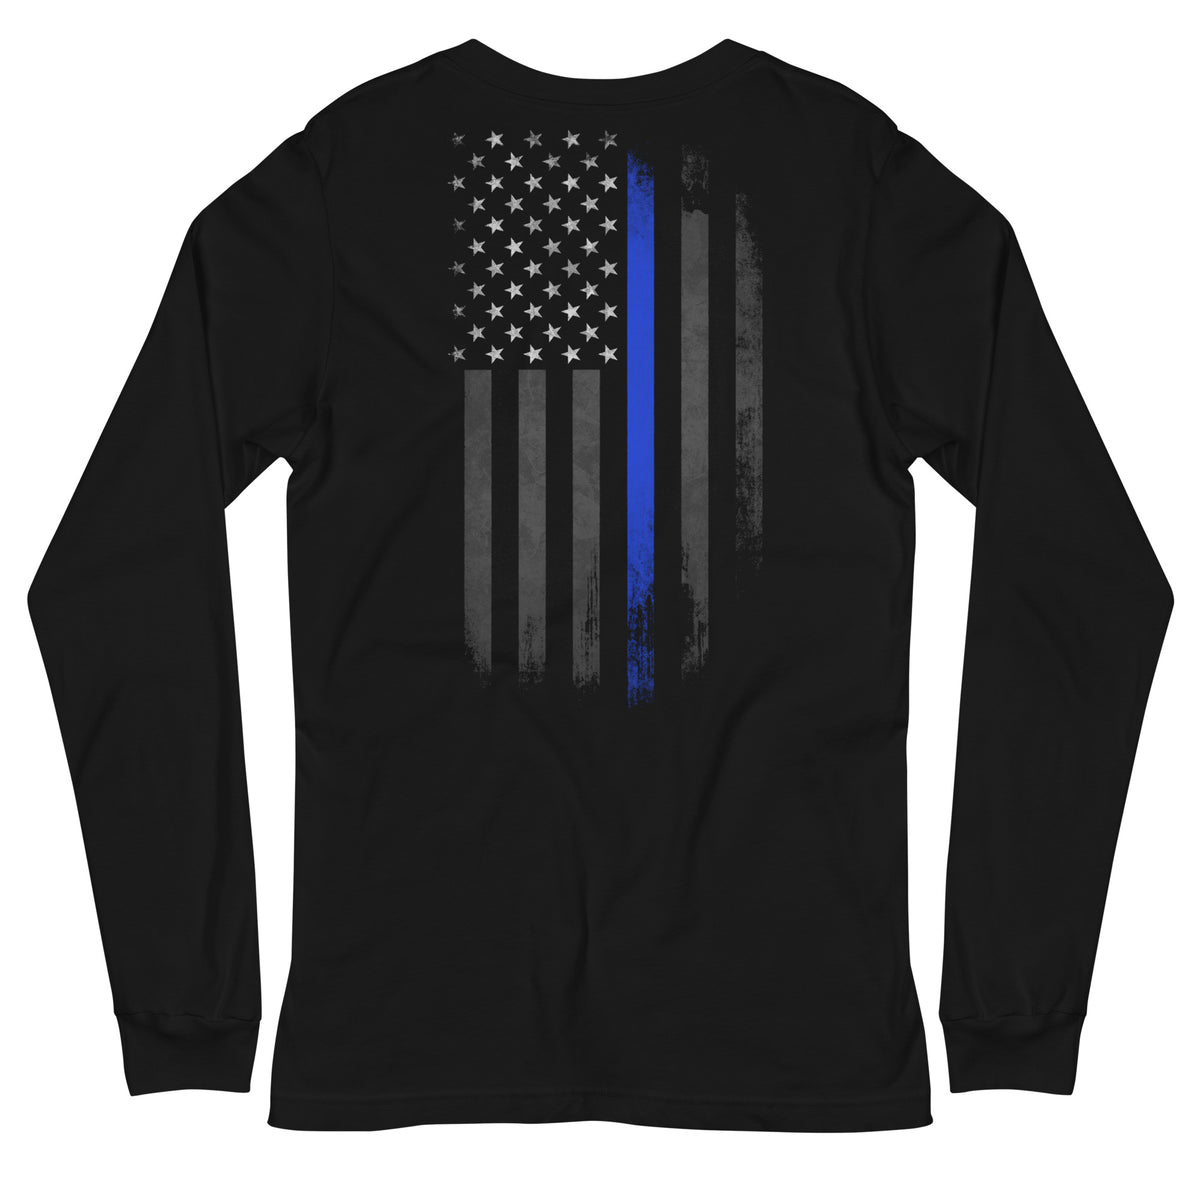 Police: Black and Blue Long Sleeve